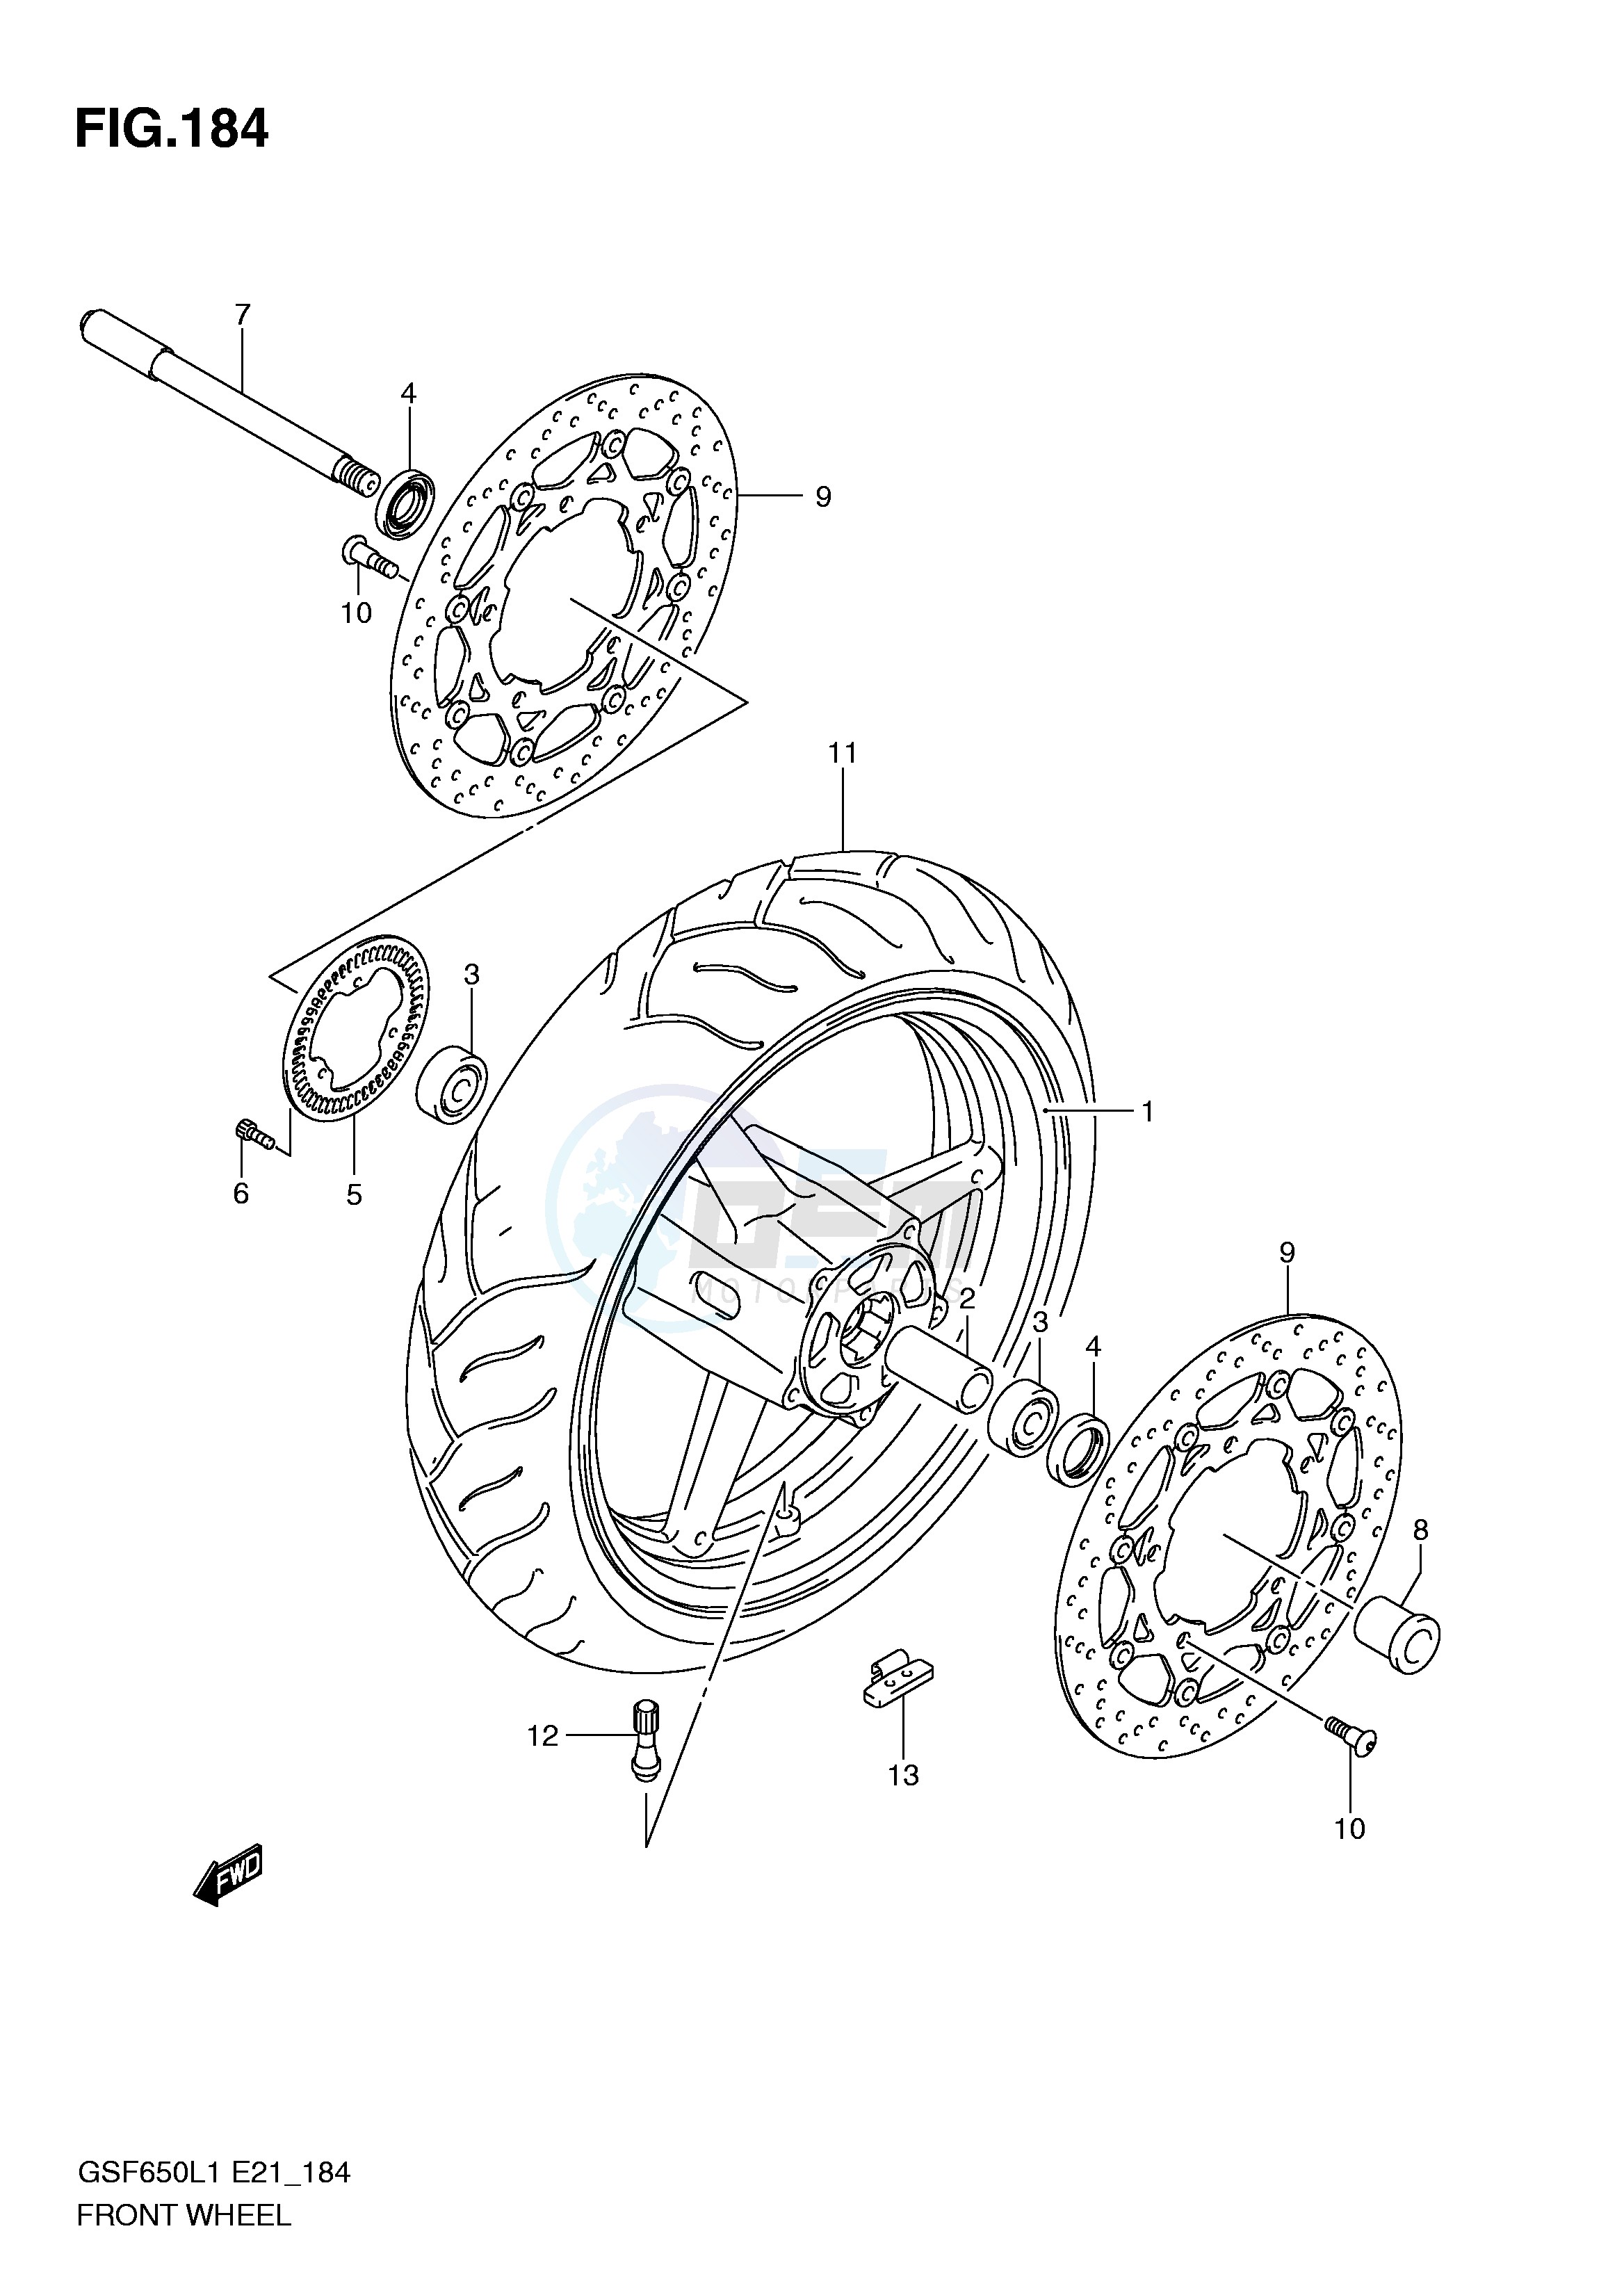 FRONT WHEEL (GSF650SUAL1 E21) image